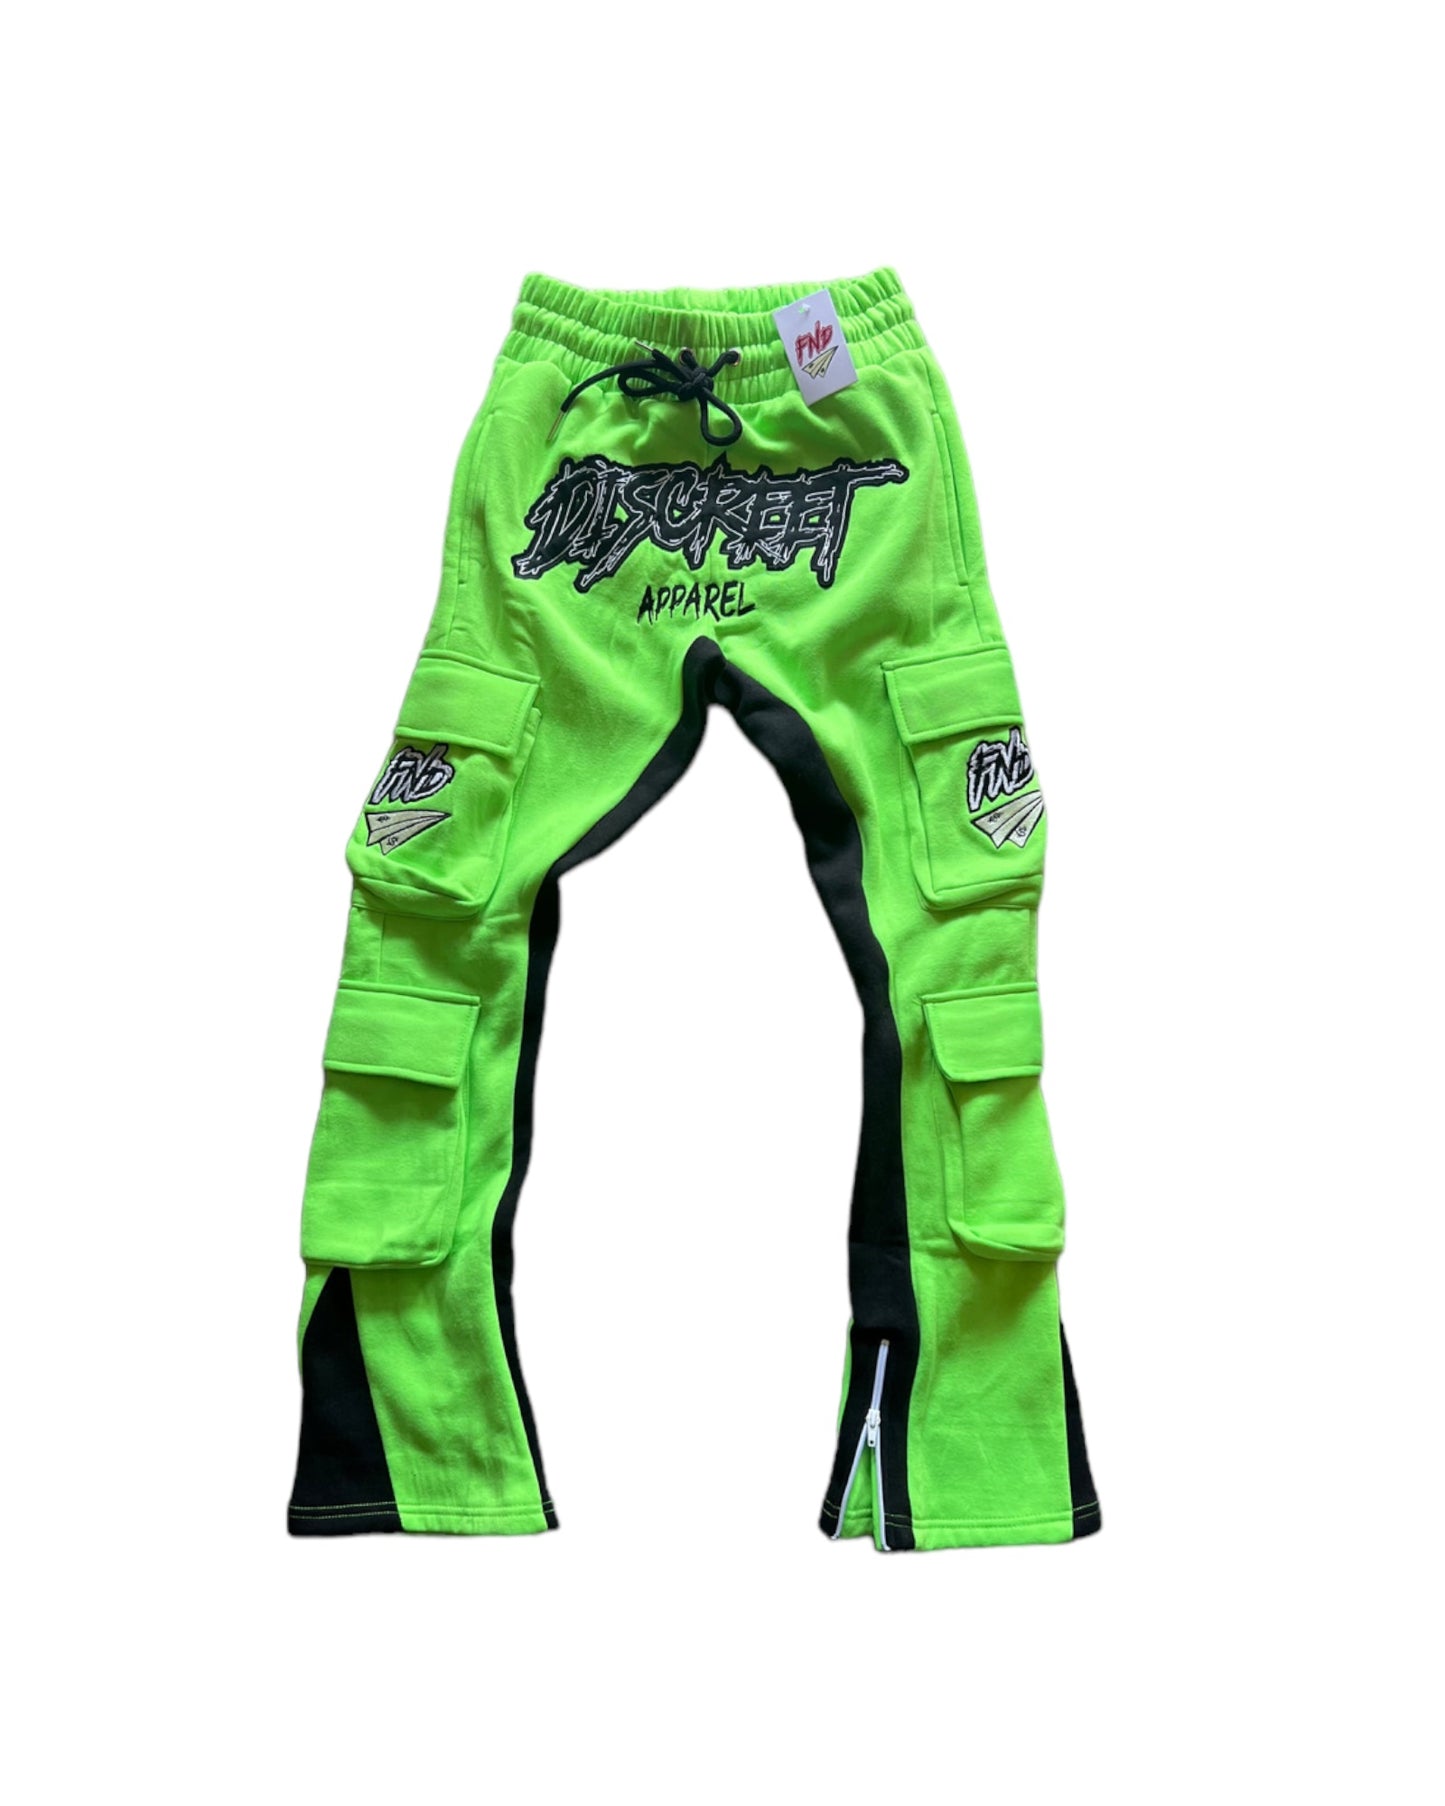 Green Slime SZN Stacked Pants